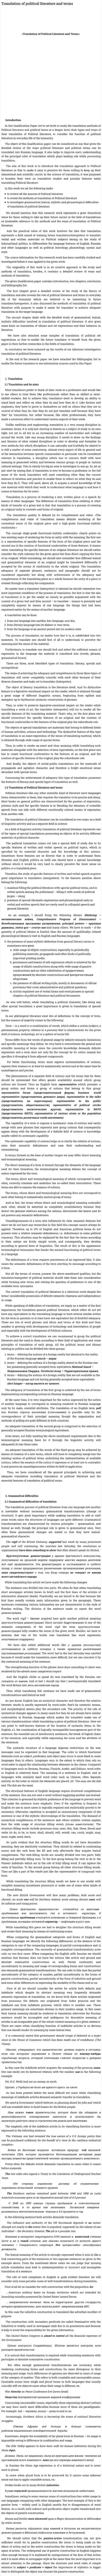 Translation of political literature and terms